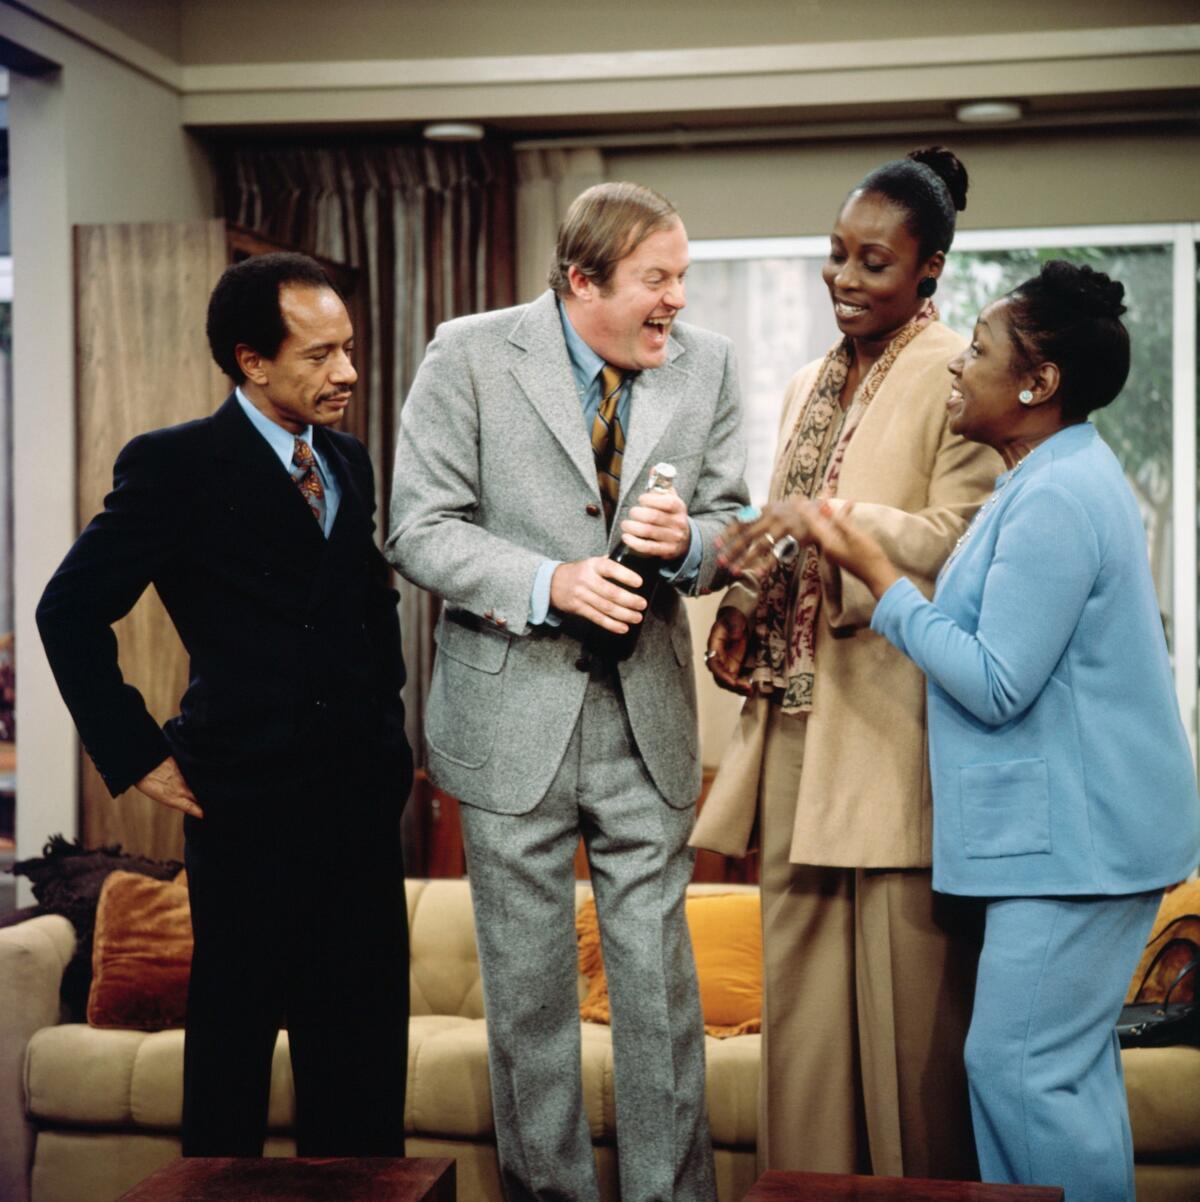 Sherman Hemsley, from left, Franklin Cover, an unidentified actor and Isabel Sanford in a 1975 episode of "The Jeffersons."